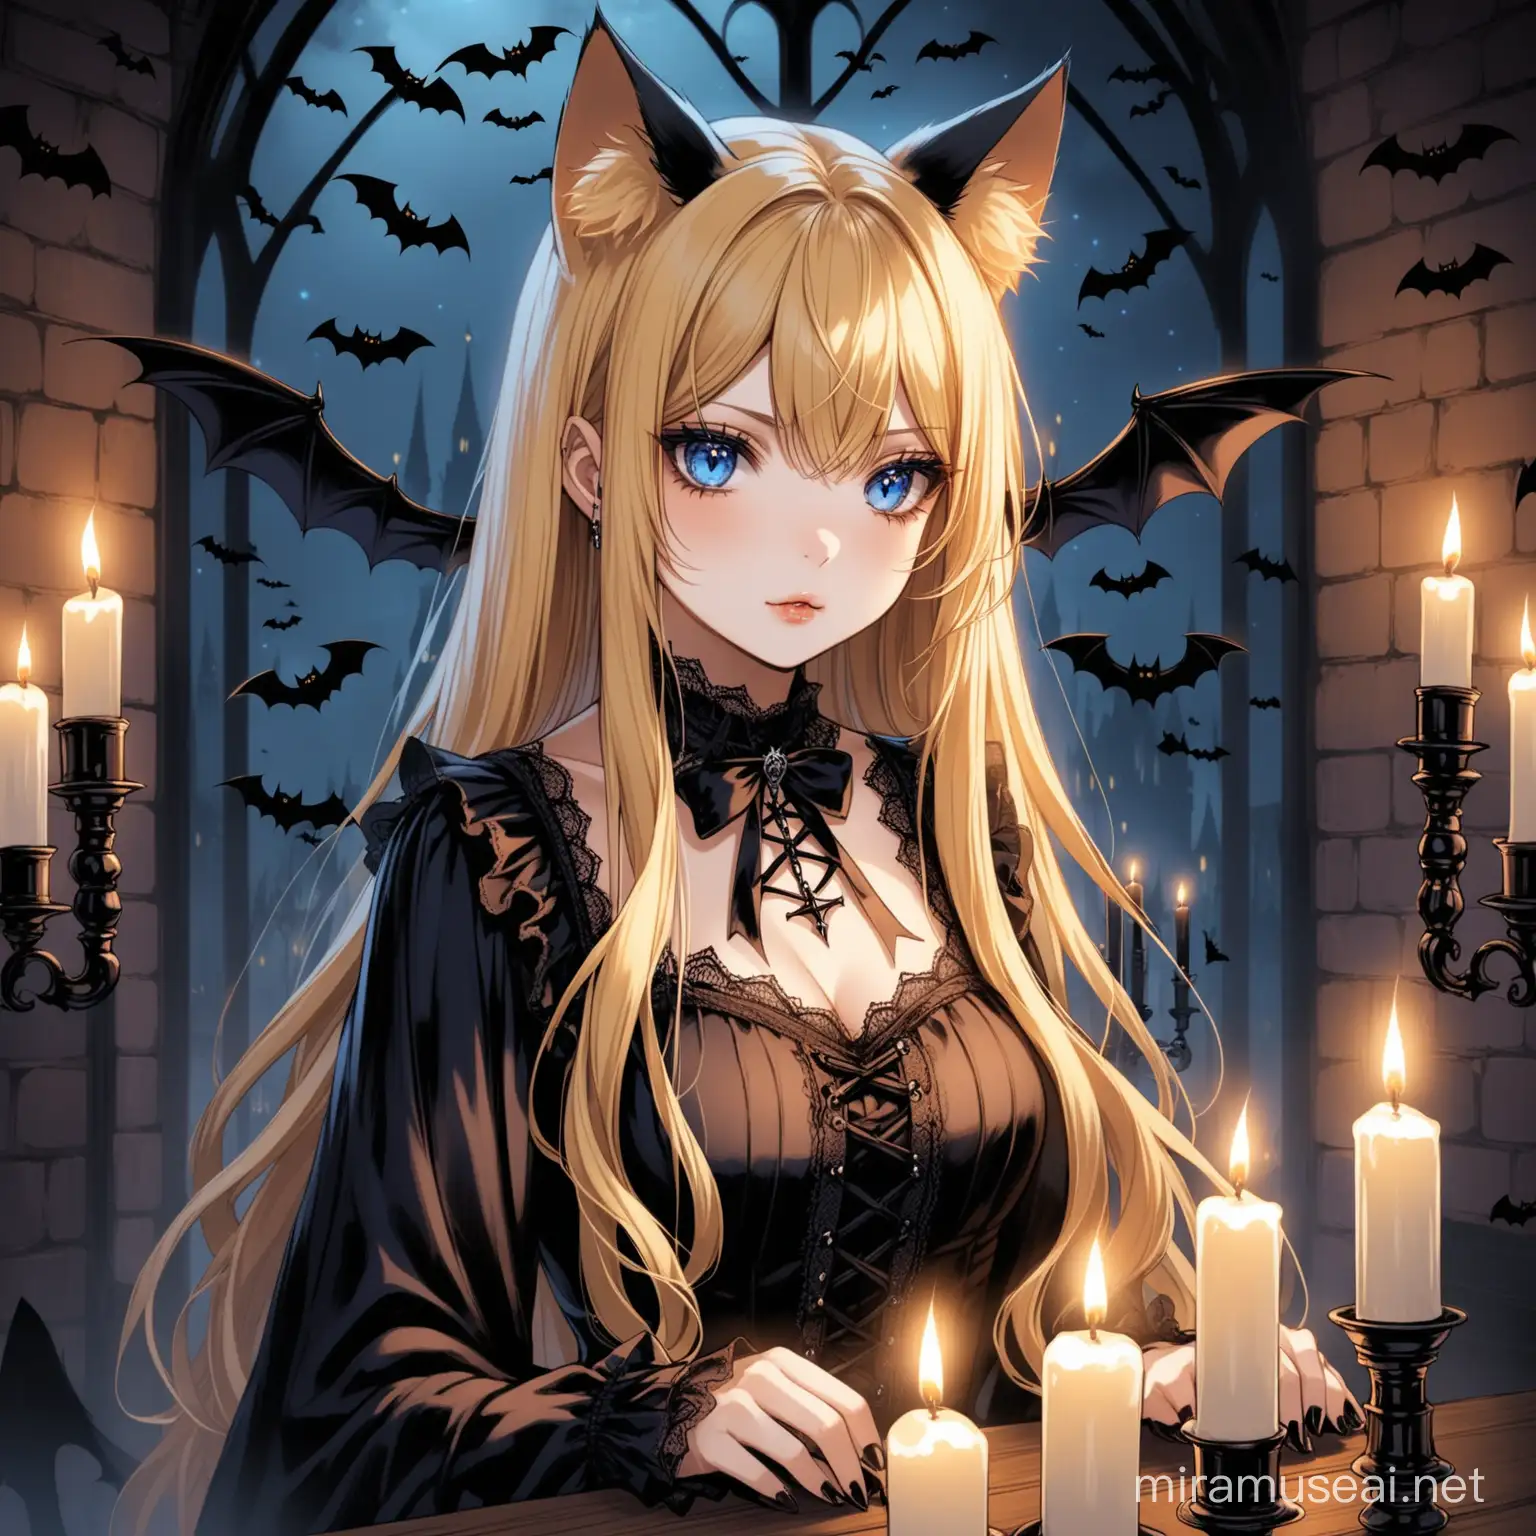 Mysterious Gothic Woman with Cat Ears Surrounded by Candles and Bats